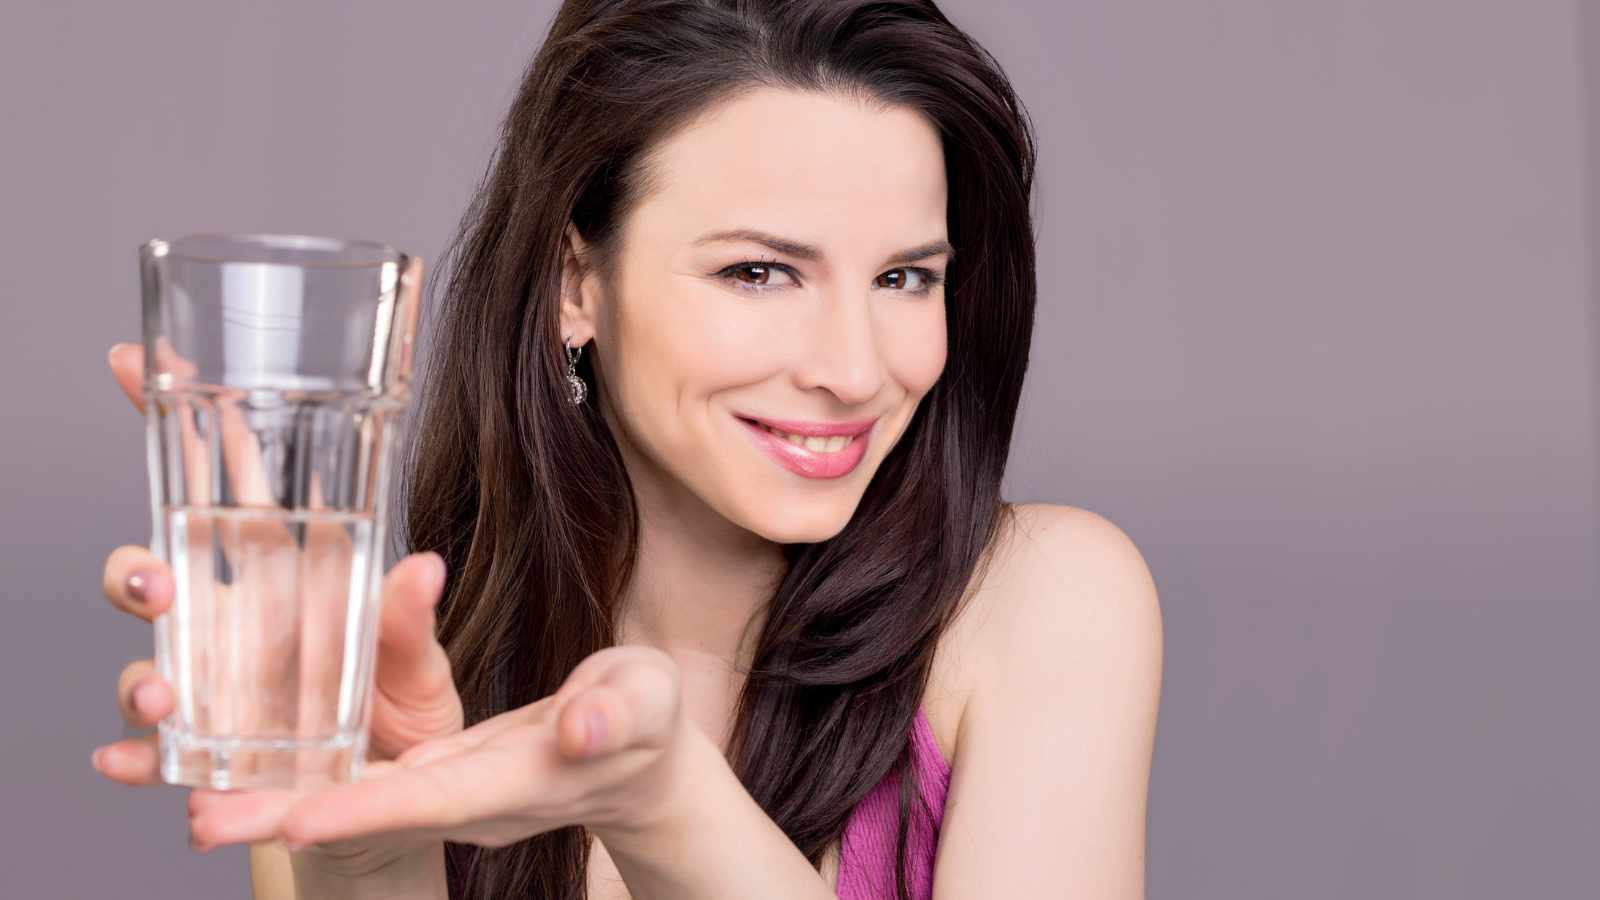 Woman holding up a glass of water